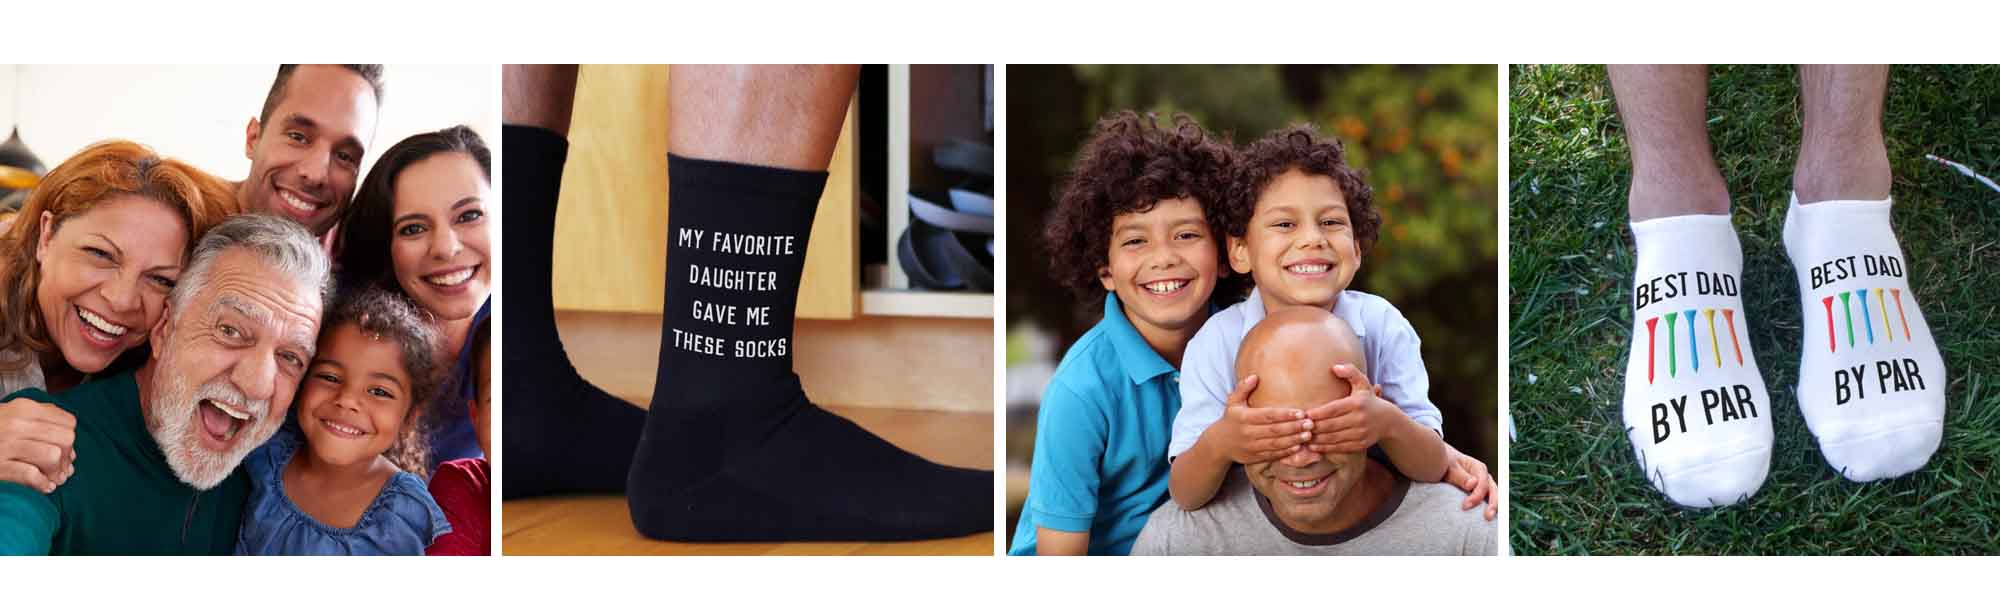 Fun socks for Father's Day that dad will love